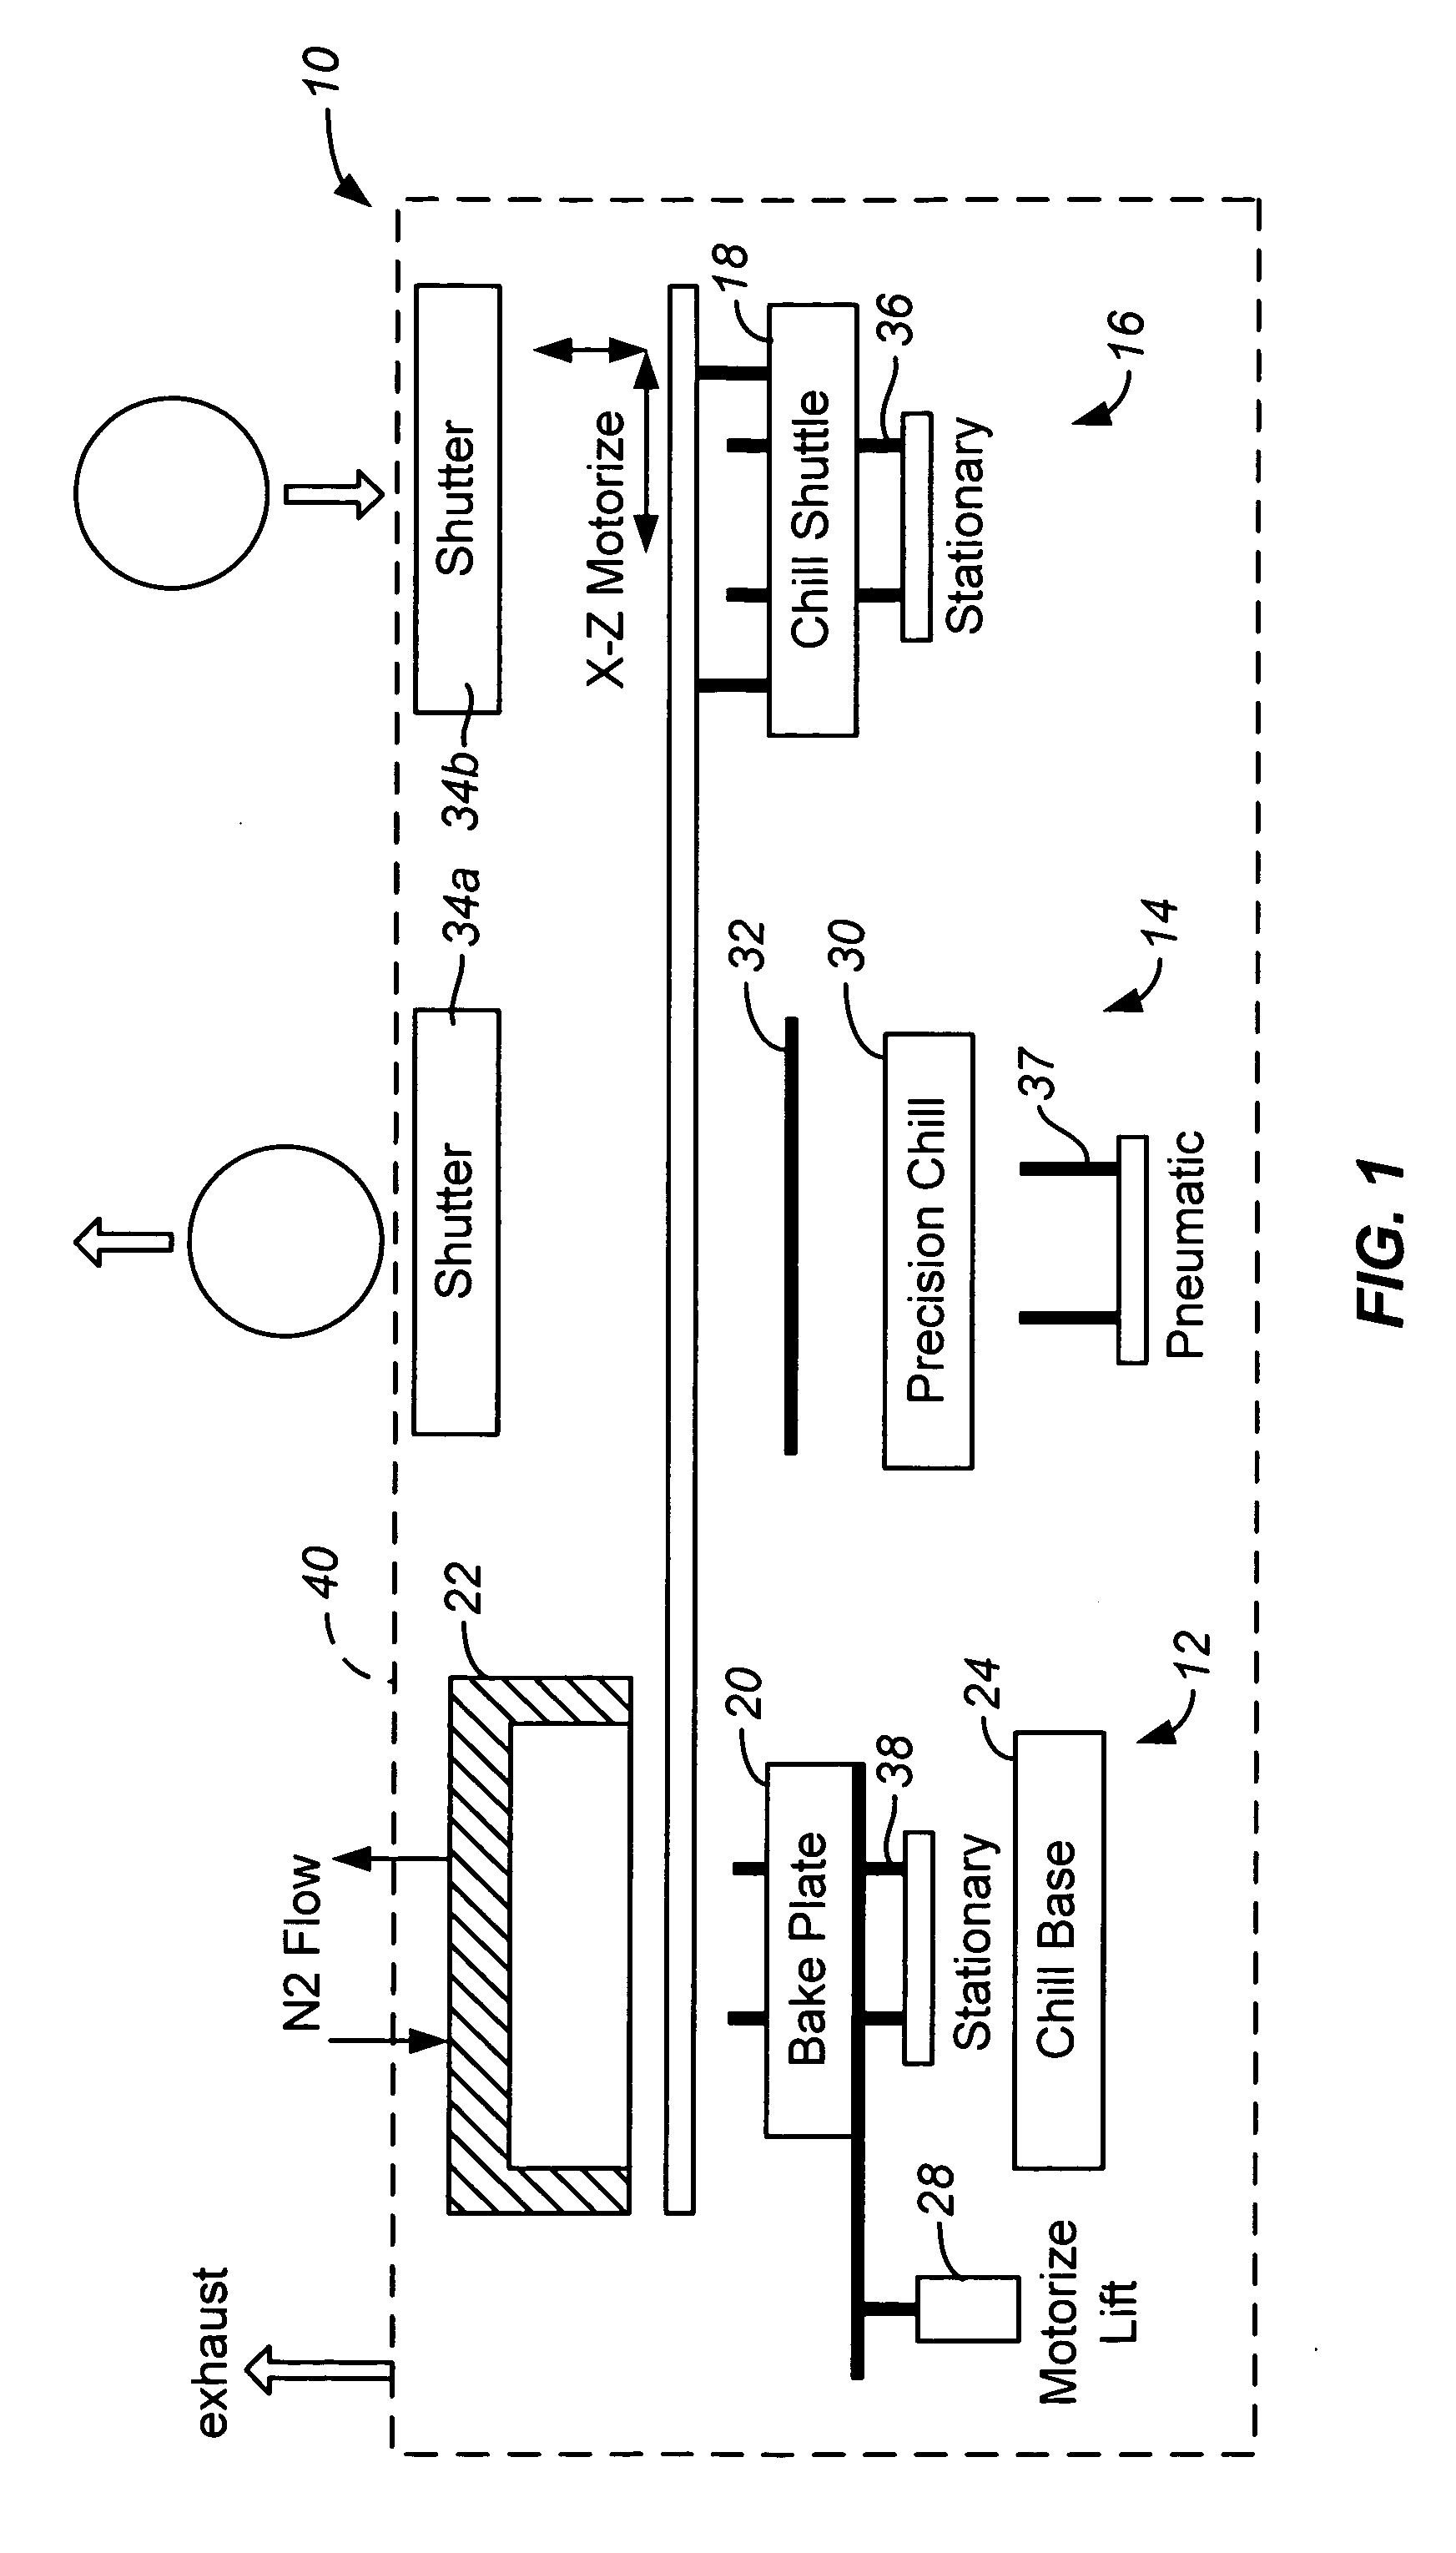 Integrated thermal unit having a shuttle with two-axis movement